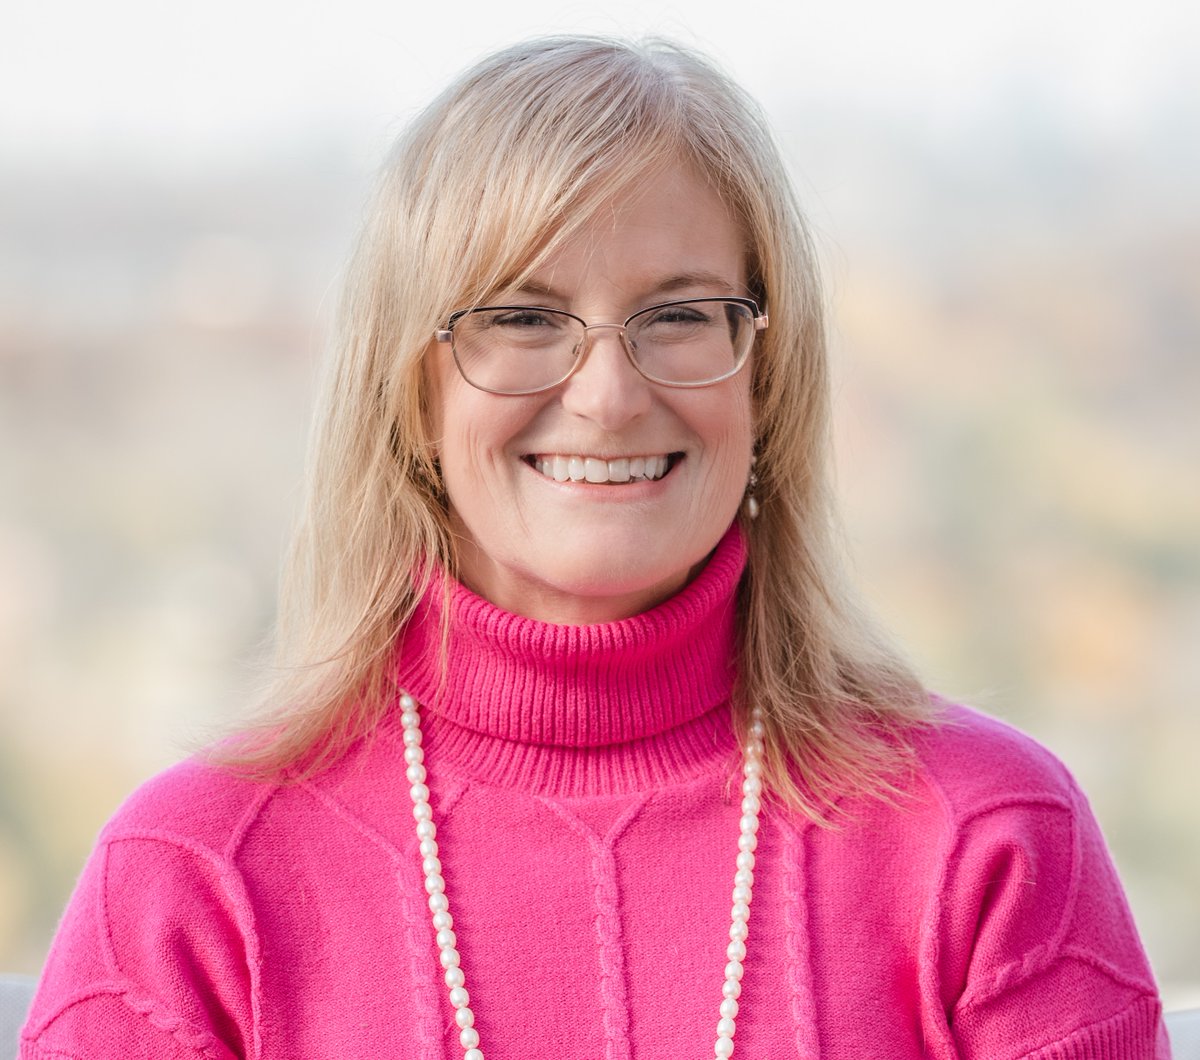 Congratulations to the Comprehensive Injury Center's WisAPP Director Maureen Busalacchi on her recent election to the position of @WIPublicHealth President-Elect! We are excited to see you guide public health in Wisconsin!